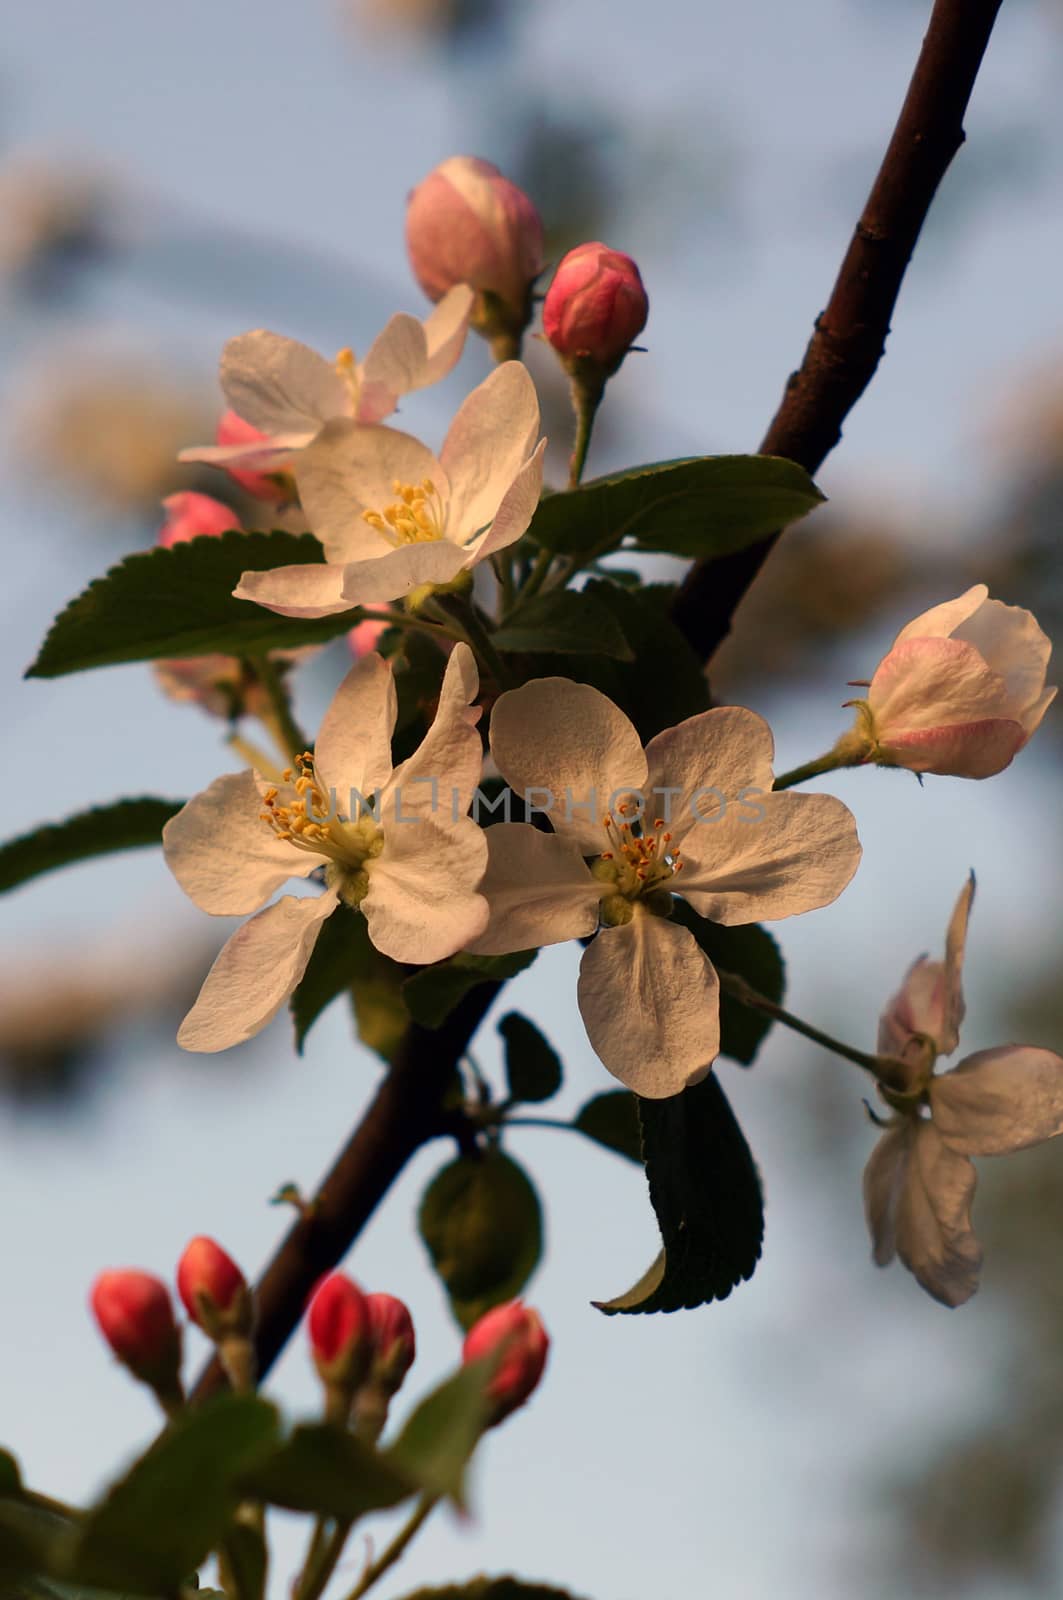 Branch blossoming apple by Chiffanna